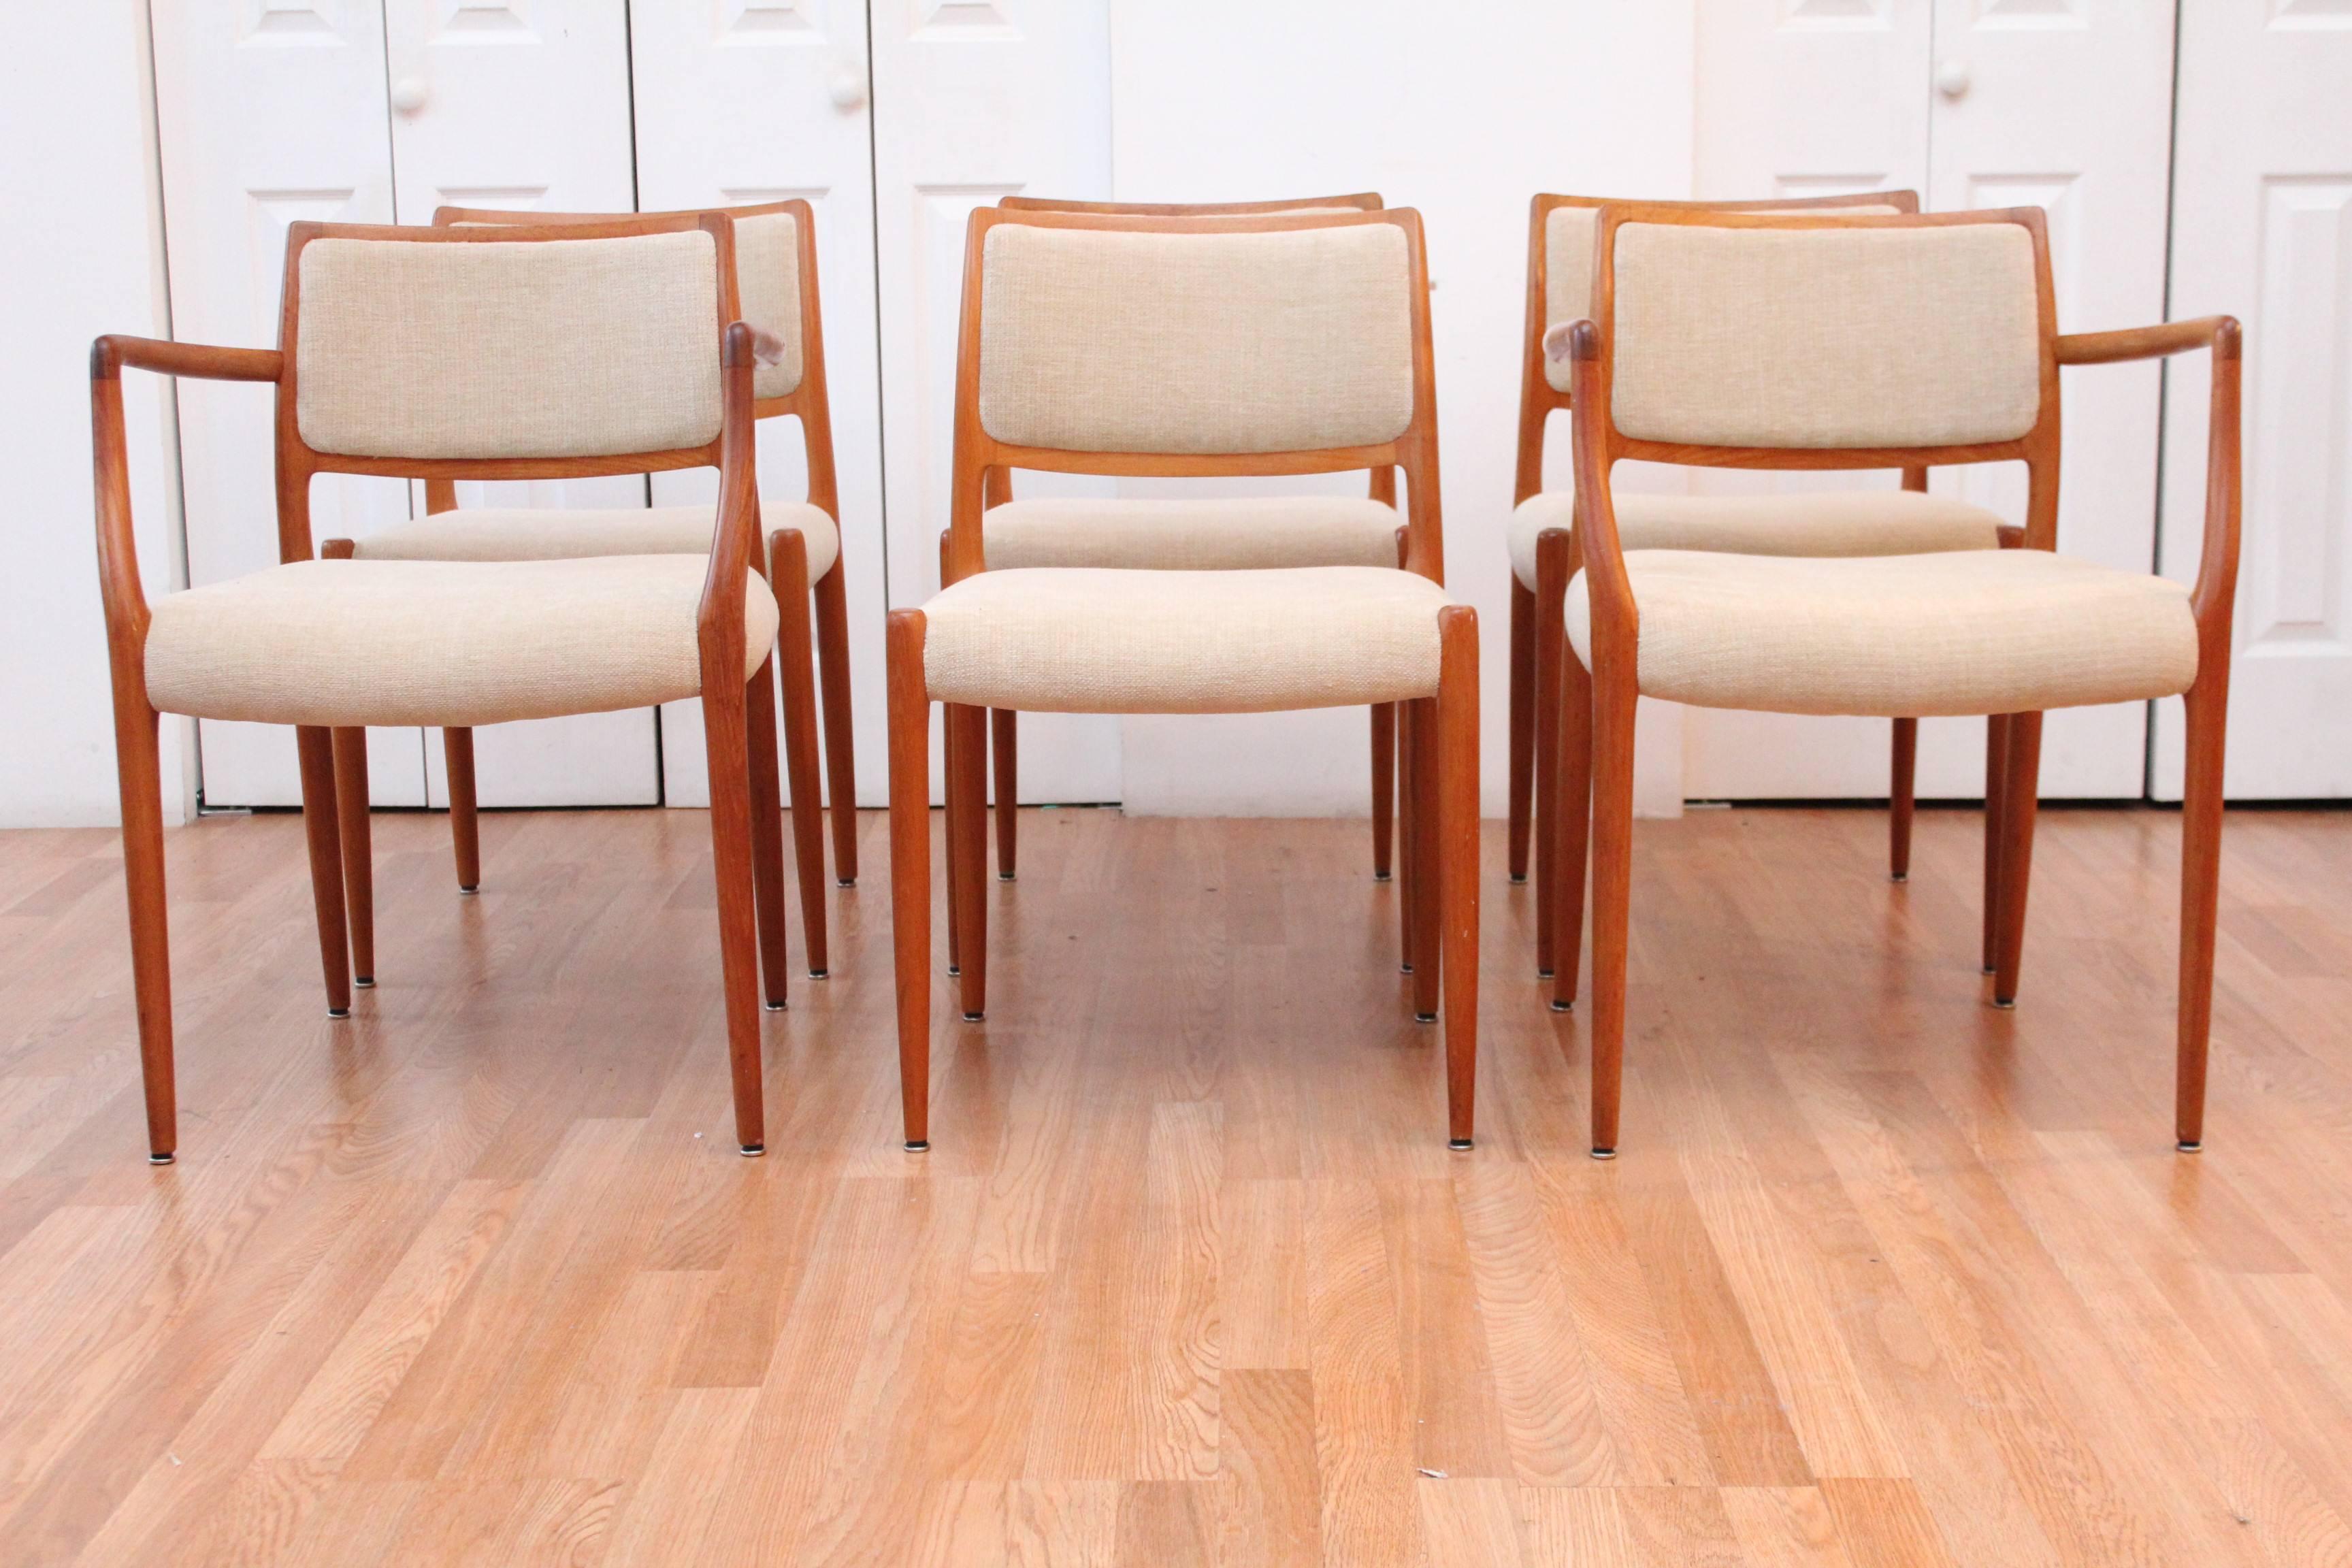 Set of six Danish modern dining chairs designed by Niels Otto Møller, for J.L. Moller, Denmark. Branded with the JL Moller signature, these chairs are a testament to superbly constructed Scandinavian Modern vintage design. All chairs